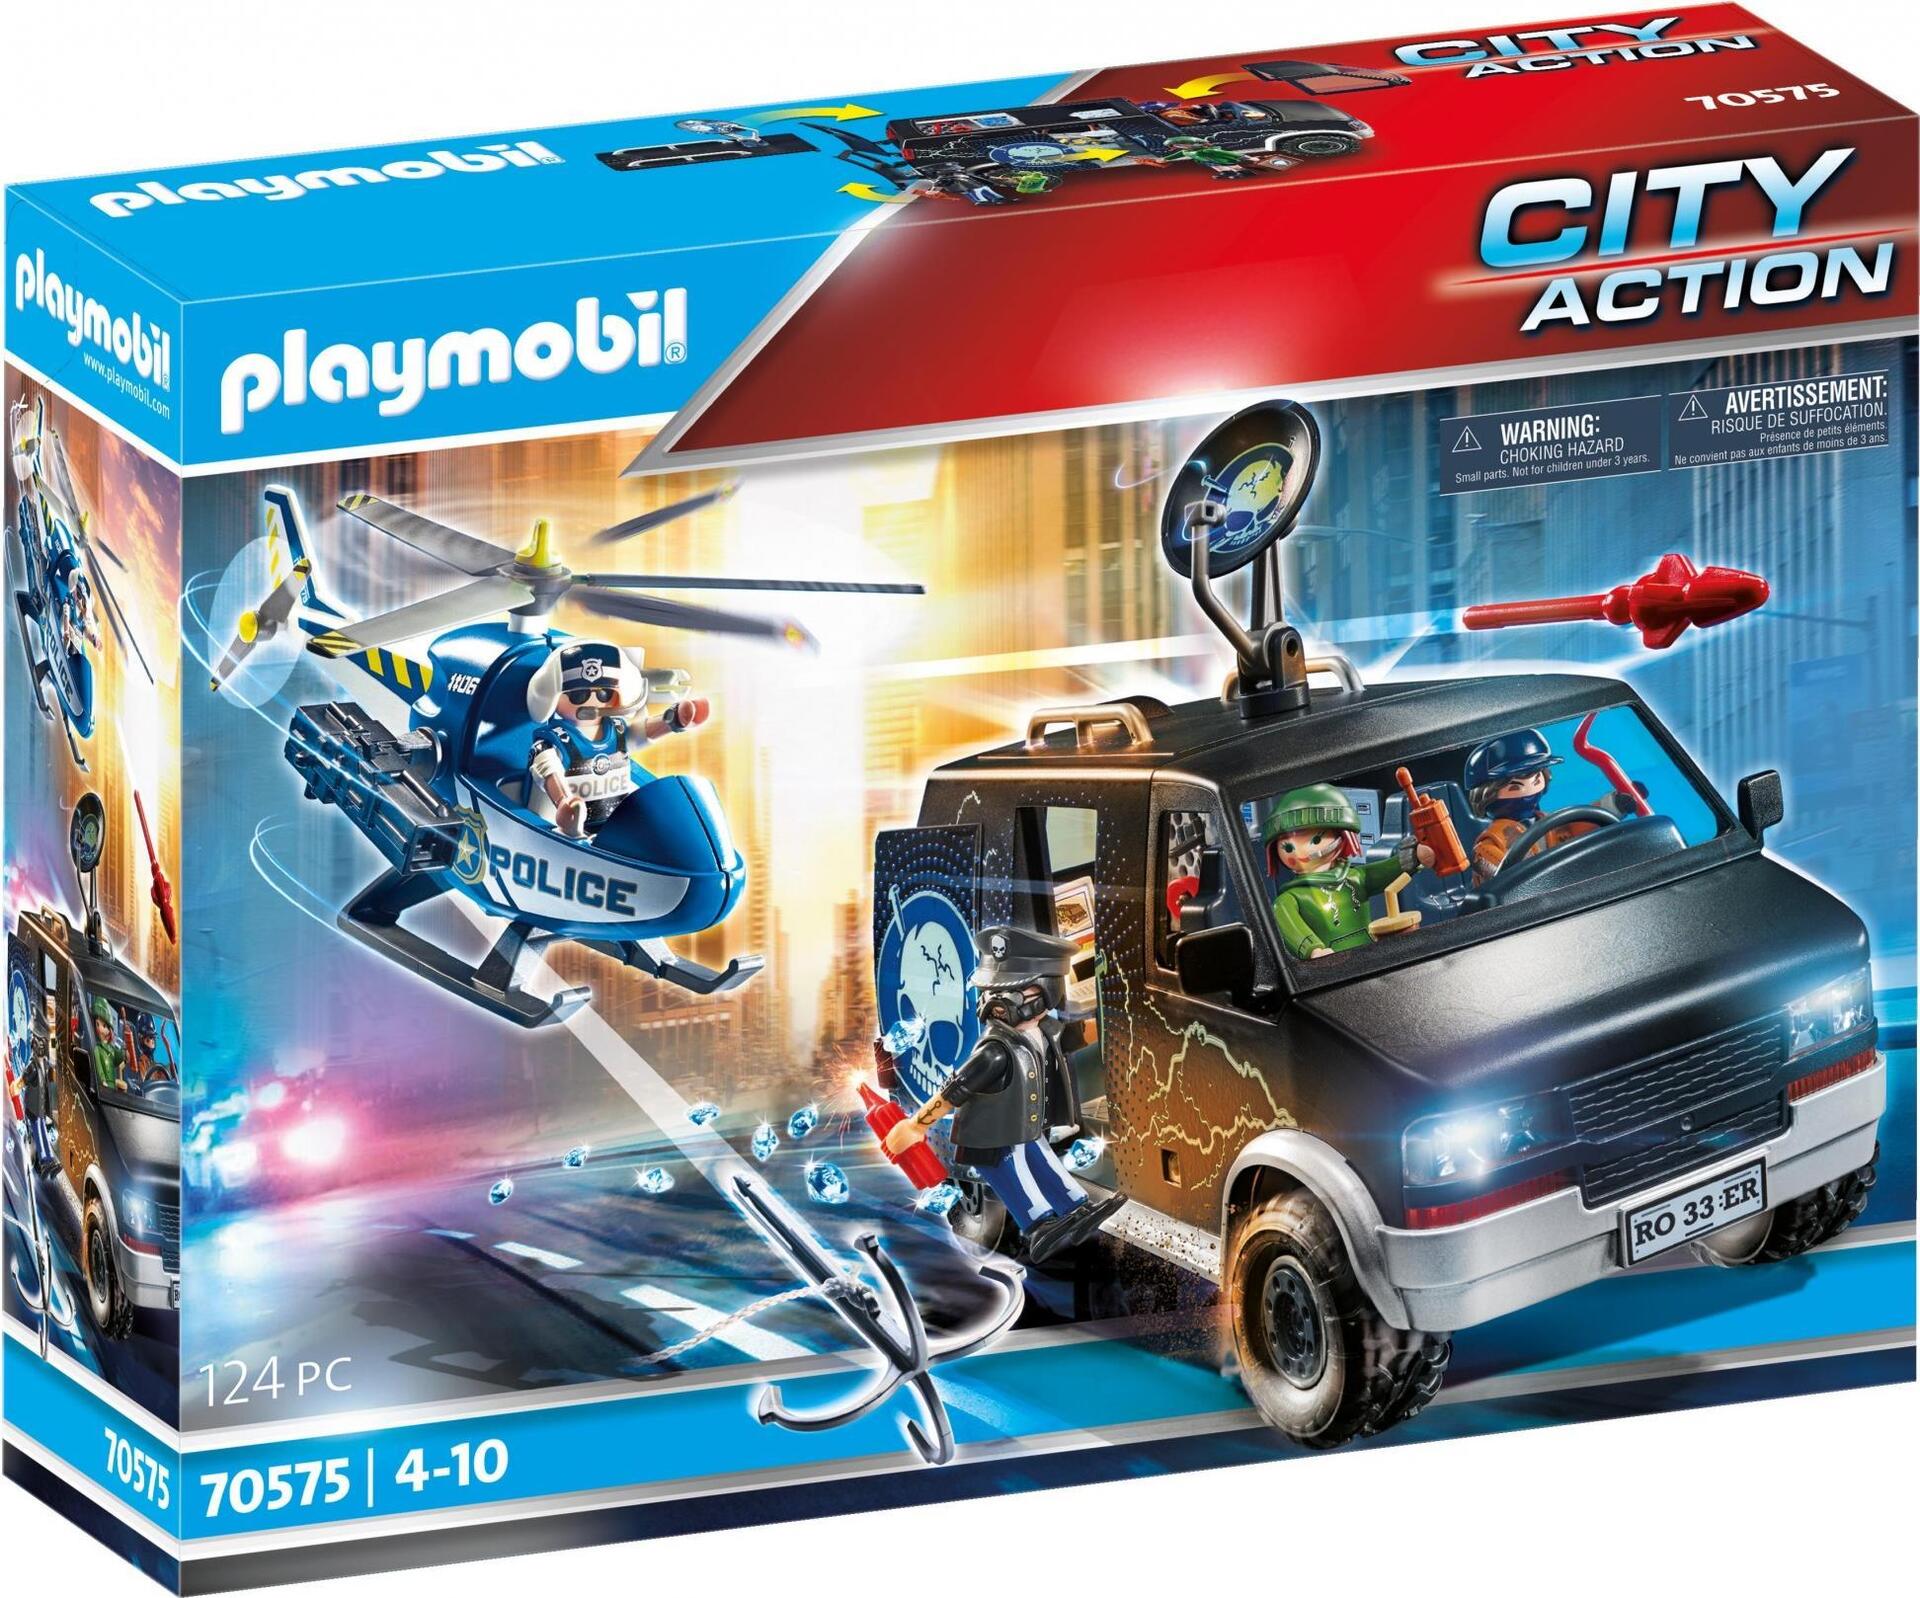 Playmobil City Action Polizei-Helikopter